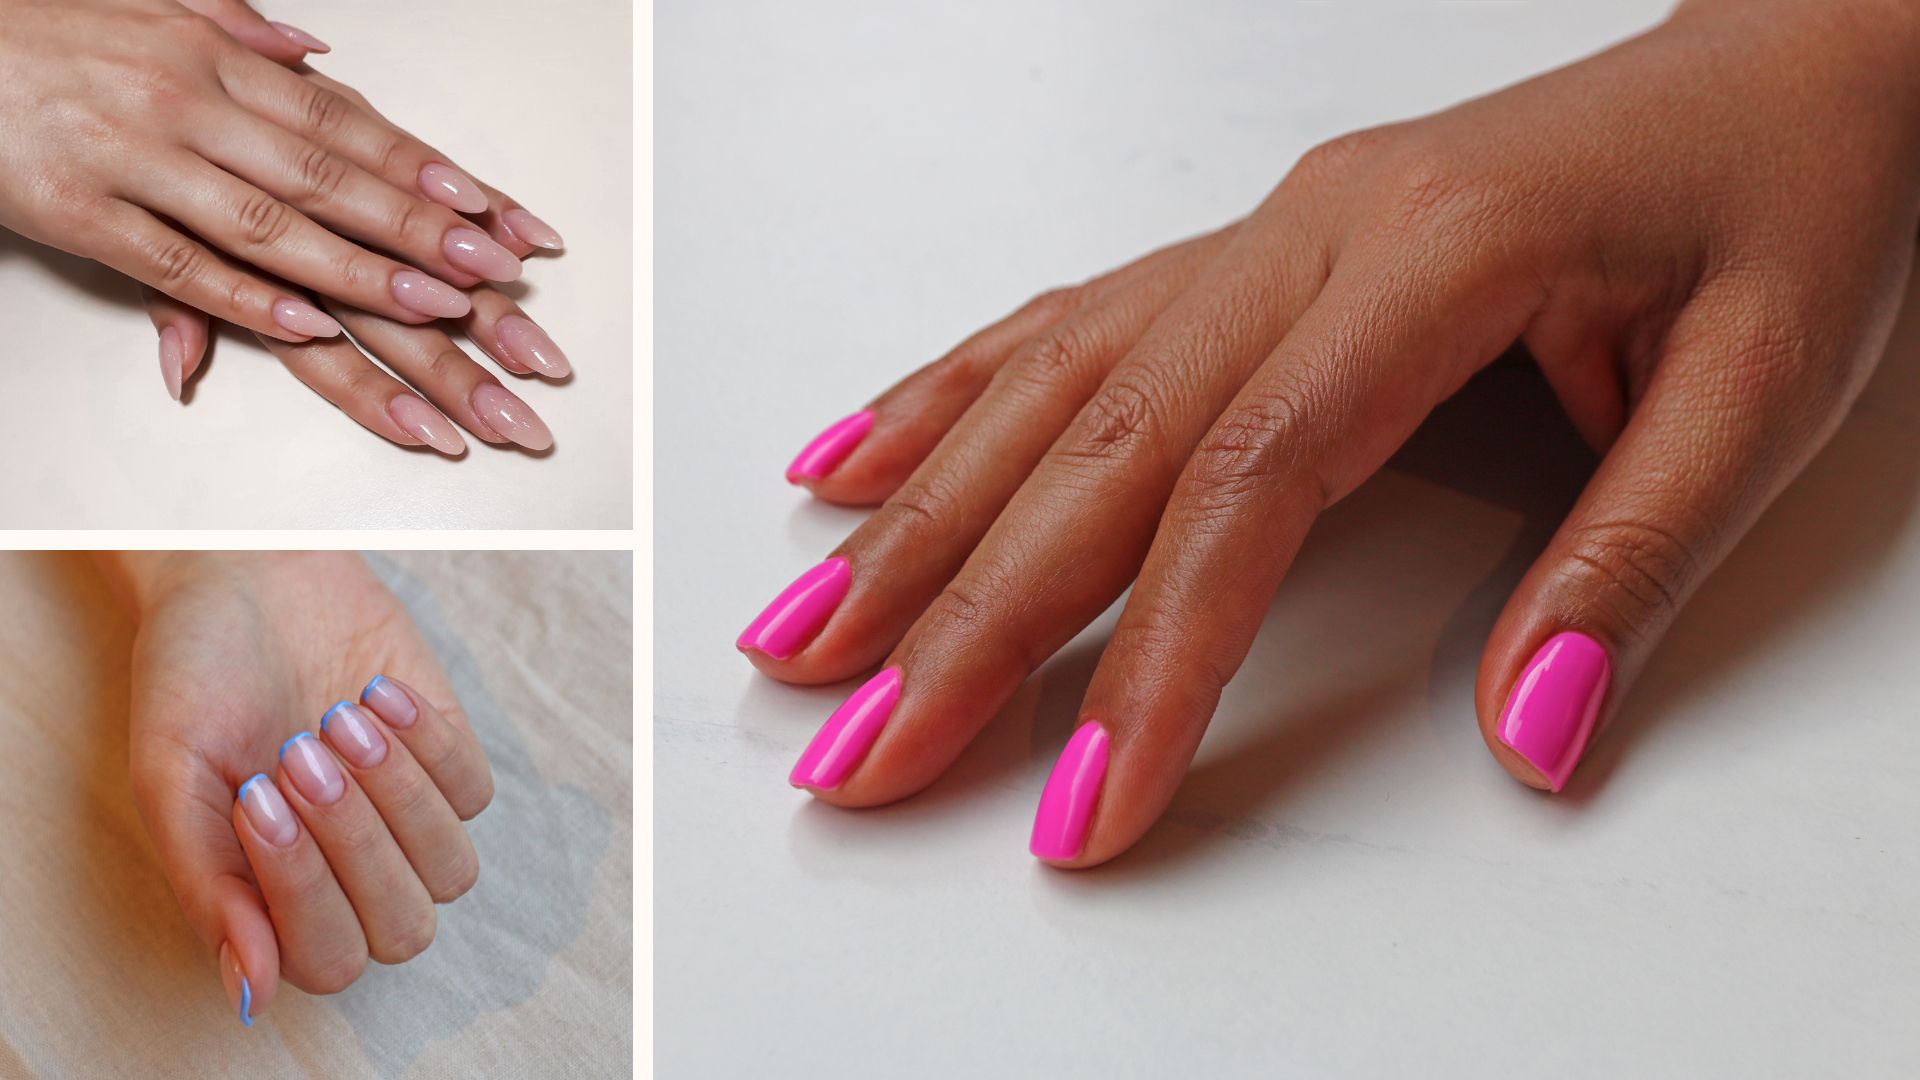 1. "10 Trending August Nail Color Ideas for 2021" - wide 9